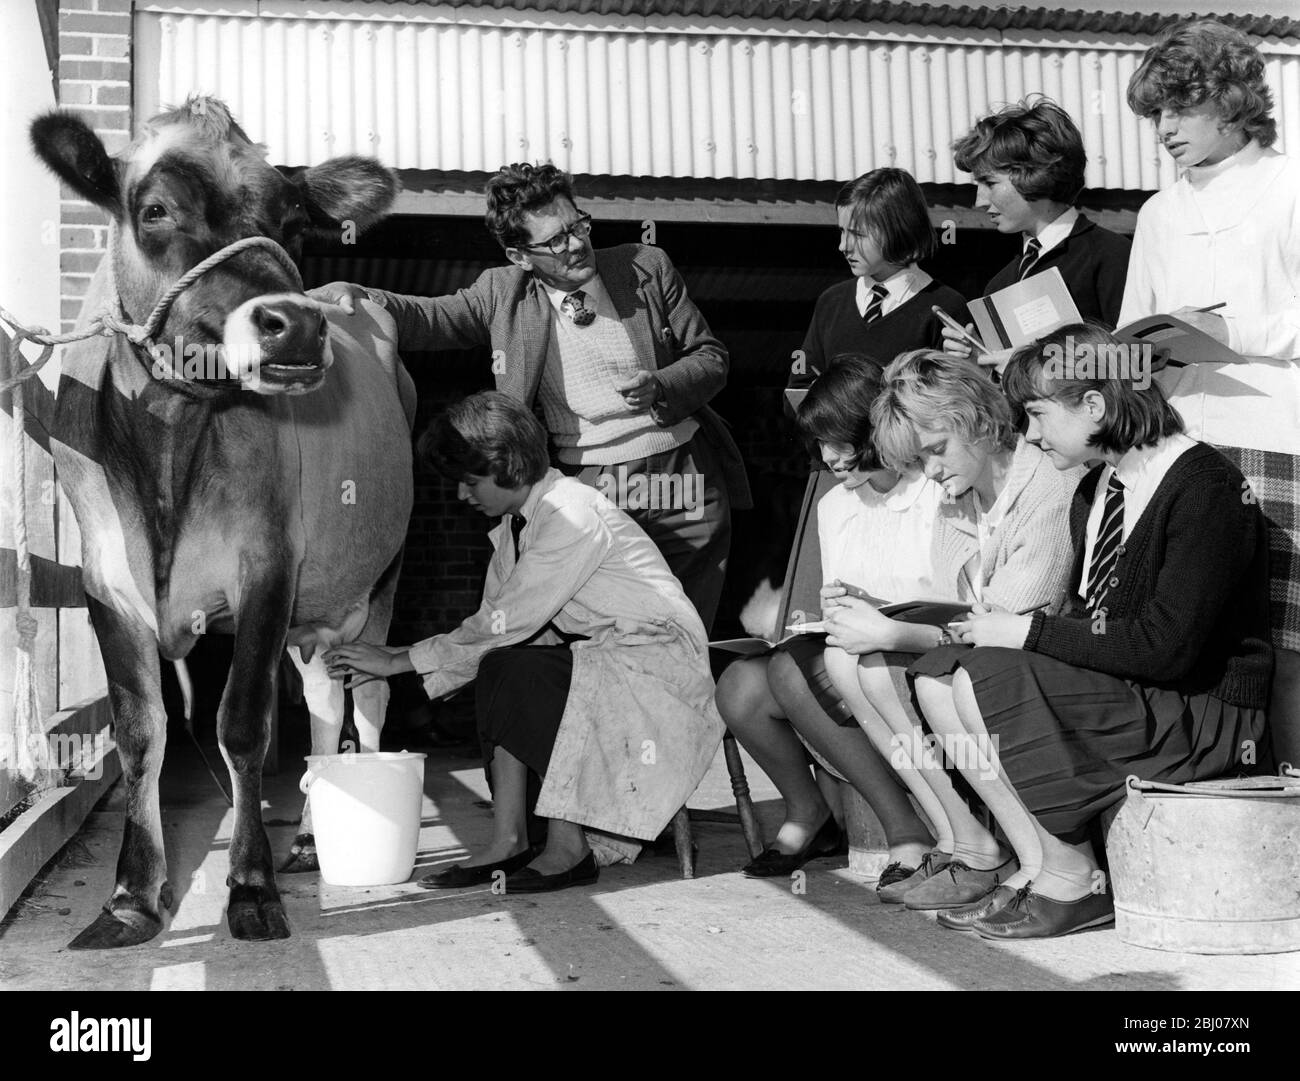 At the School at Wrotham in Kent , situated in the country , strong emphasis is placed on Rural Studies with practical teaching to develop the children's interest in the countryside . - 14 year old Yvonne Jones milks ' Hope ' the cow , while the other children make notes on the lesson being given by teacher Mr Lester Betts - 29 September 1964 Stock Photo